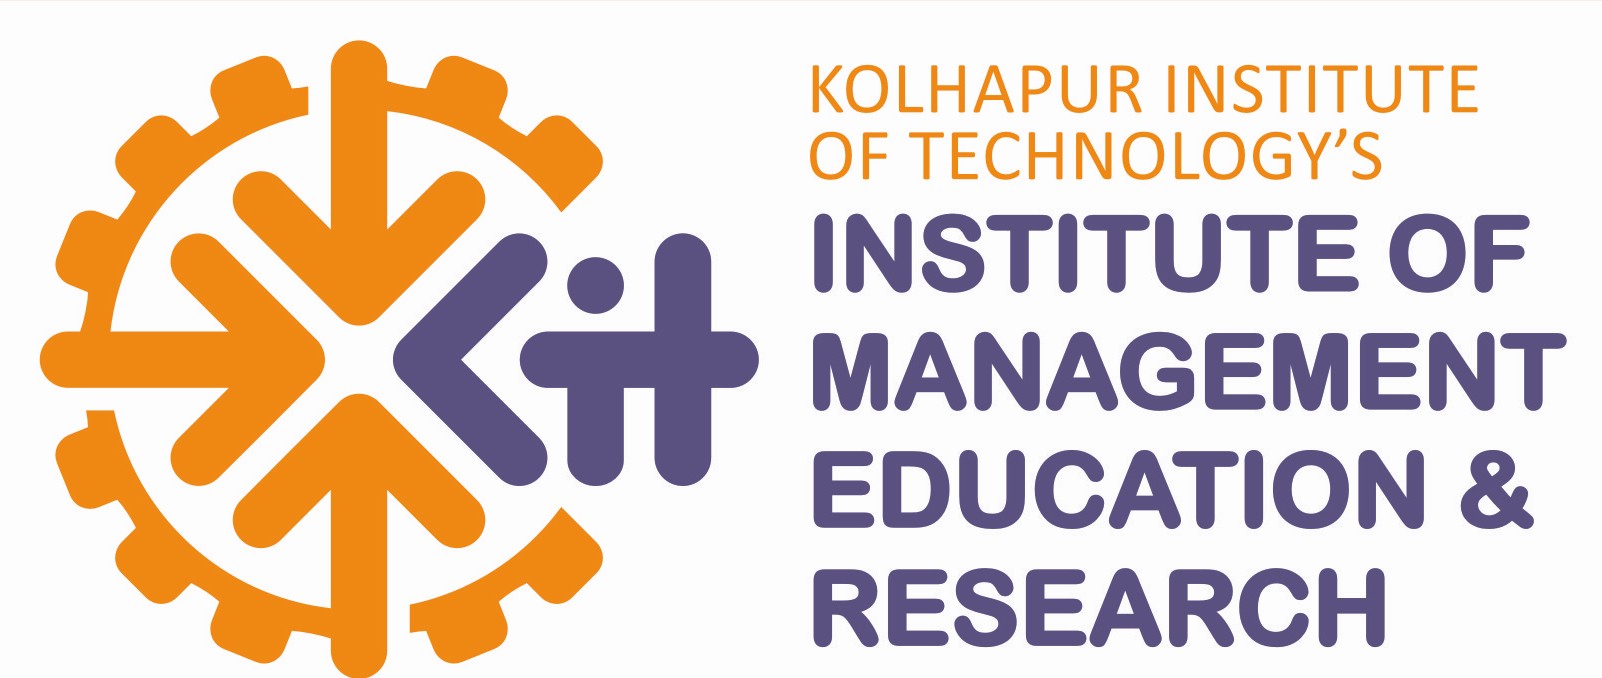 KIT's Institute of Management Education & Research